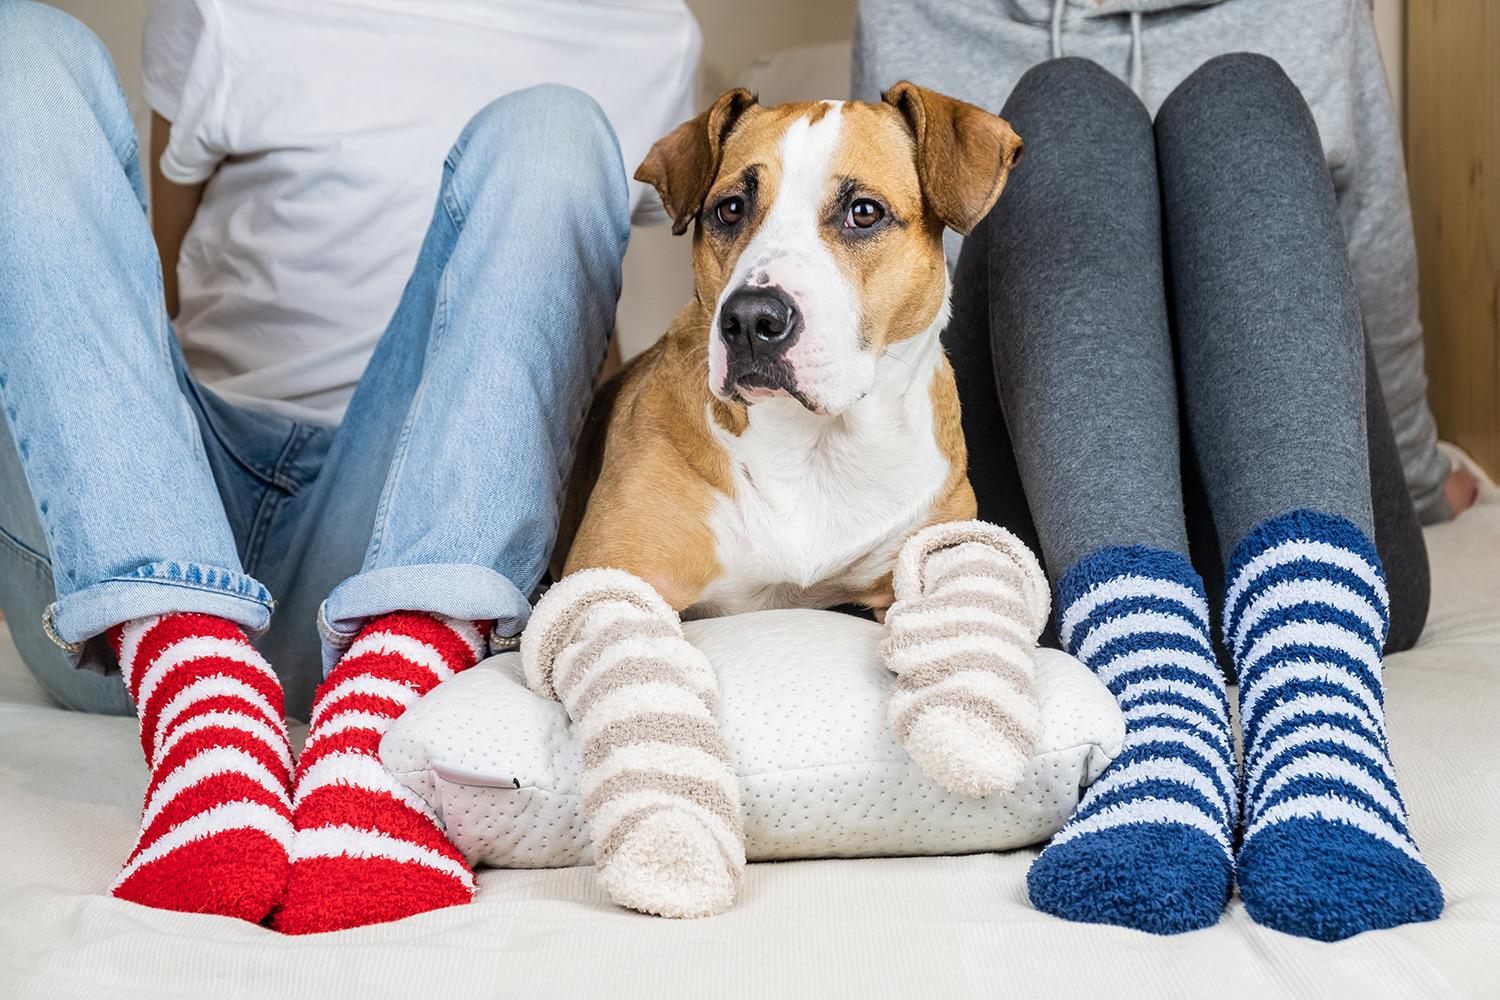 man in red and white socks next to brown and white dog wearing white socks next to woman in blue and white striped socks